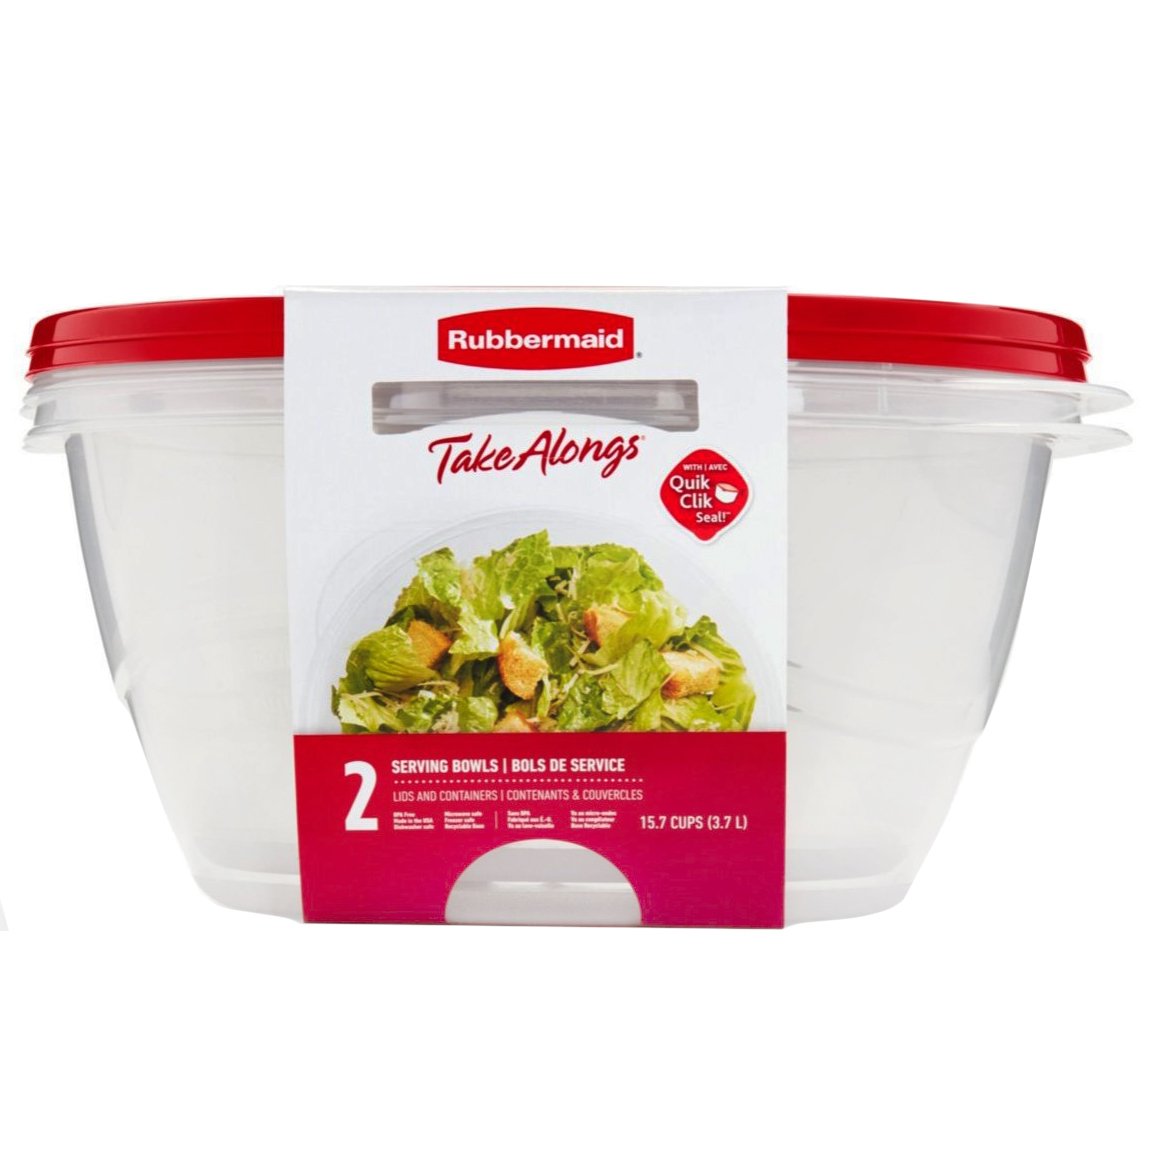 Rubbermaid TakeAlongs Serving Bowl Food Storage Containers, 2 pk